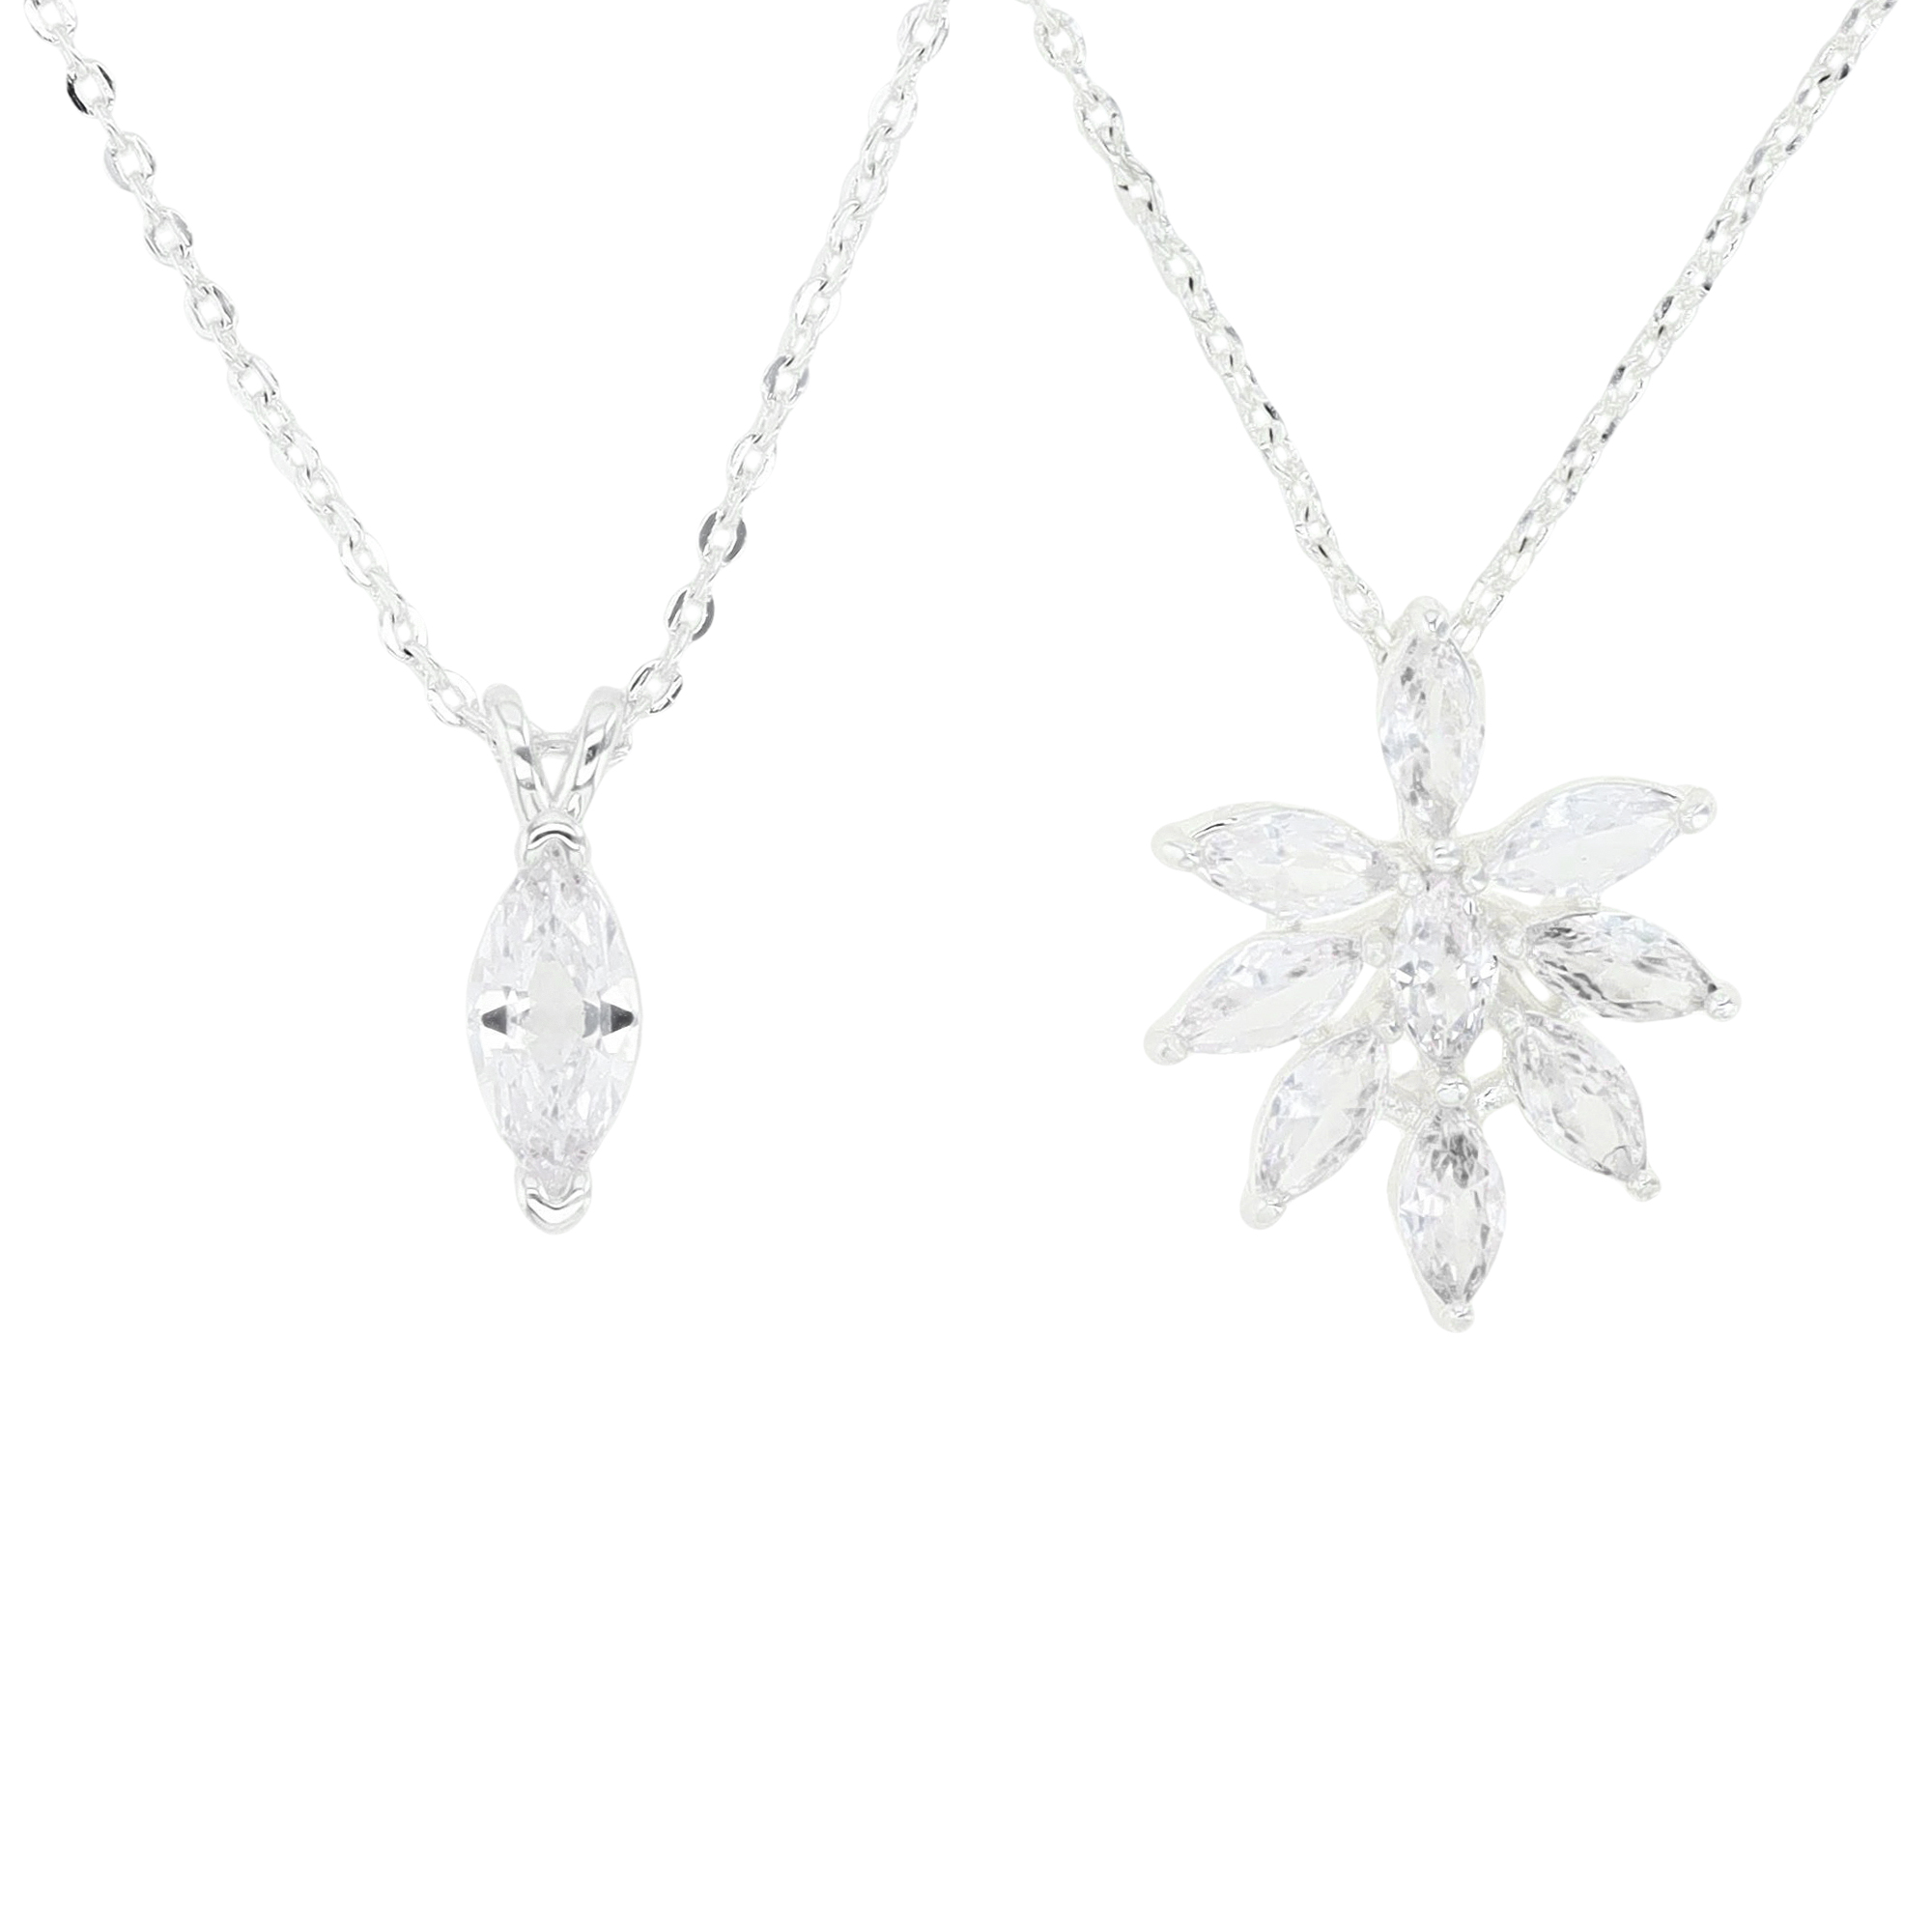 Platinum Plated Brass Silver Plated & MA Ct. White CZ Leaf 16+2" Necklace and Solitaire Pendant 15.5+2" Necklace Set